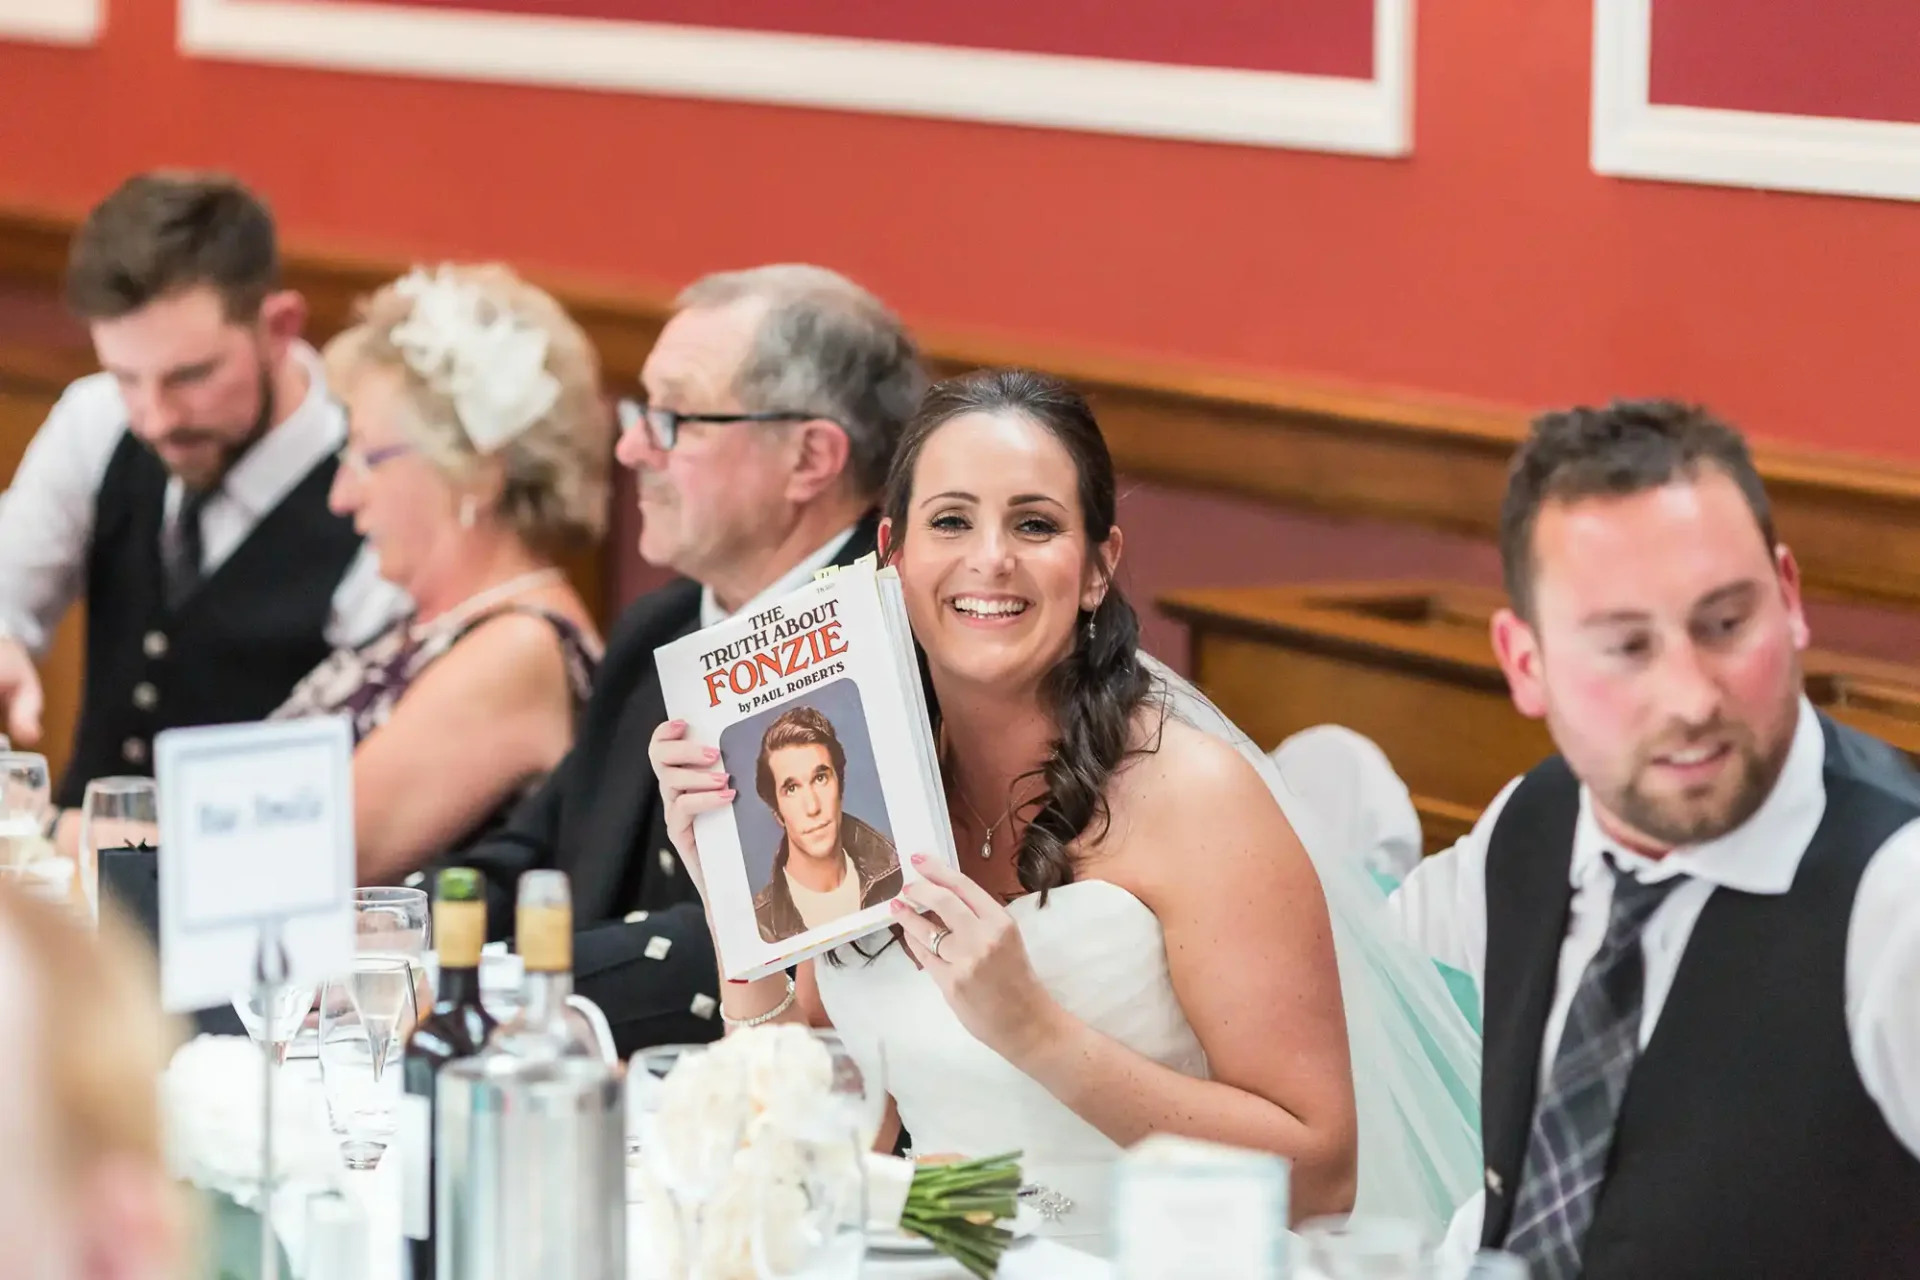 A bride at a wedding reception holds up a magazine featuring a bride on the cover, smiling, surrounded by guests at a table.